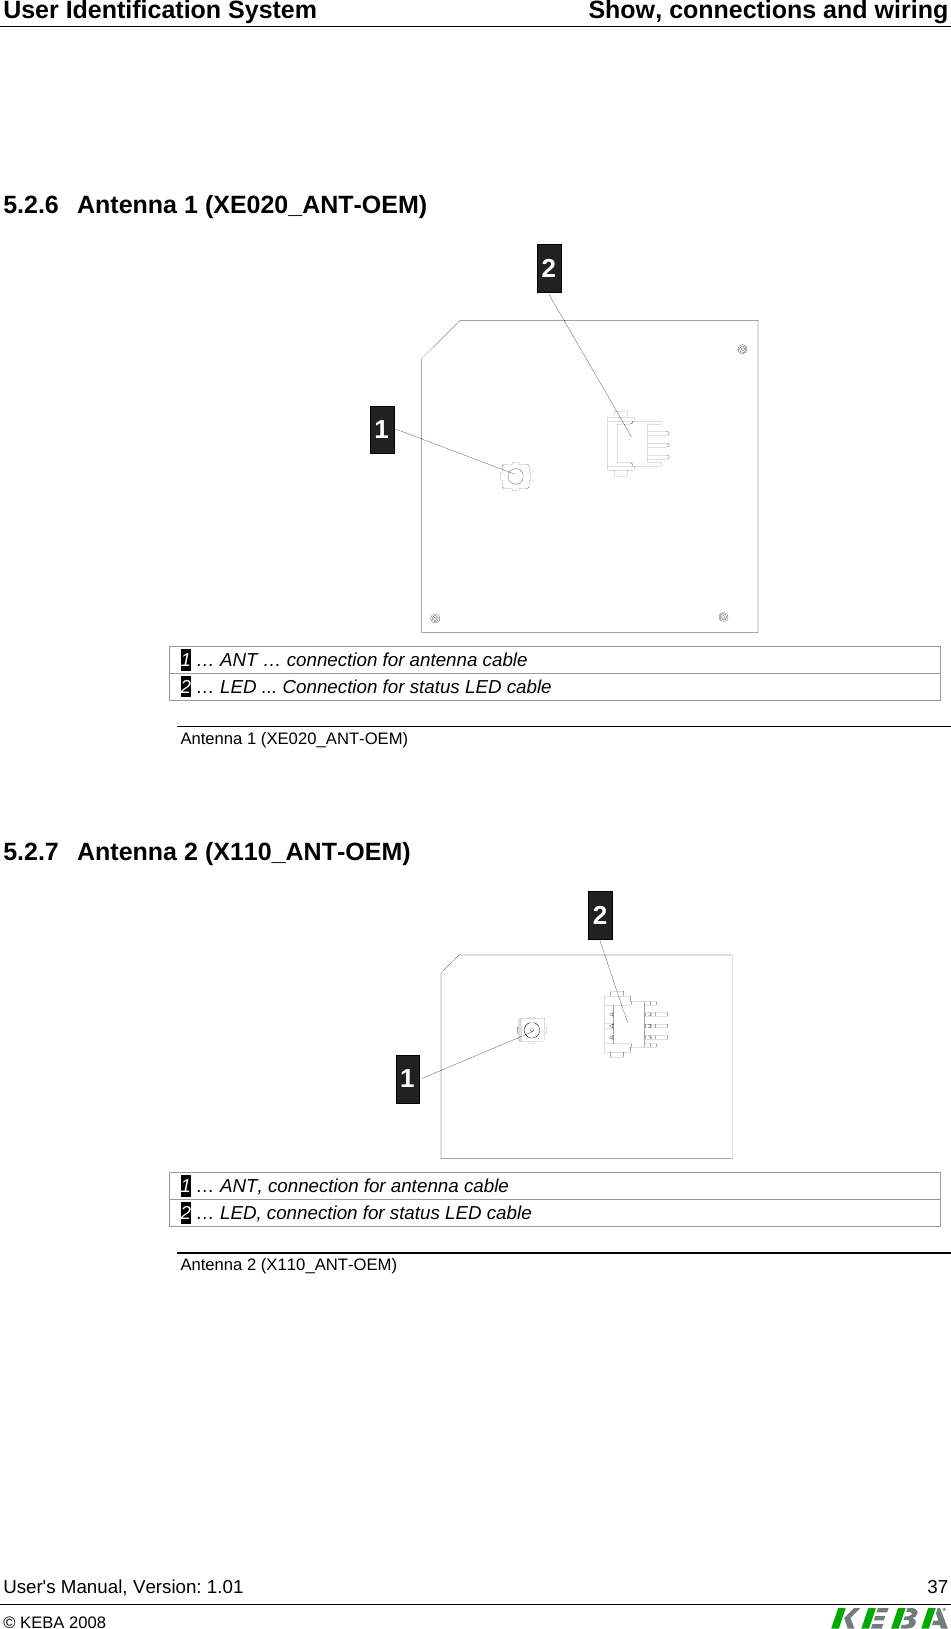 User Identification System  Show, connections and wiring User&apos;s Manual, Version: 1.01  37 © KEBA 2008    5.2.6  Antenna 1 (XE020_ANT-OEM) 12 1 … ANT … connection for antenna cable 2 … LED ... Connection for status LED cable Antenna 1 (XE020_ANT-OEM)   5.2.7  Antenna 2 (X110_ANT-OEM) 12 1 … ANT, connection for antenna cable 2 … LED, connection for status LED cable Antenna 2 (X110_ANT-OEM)   